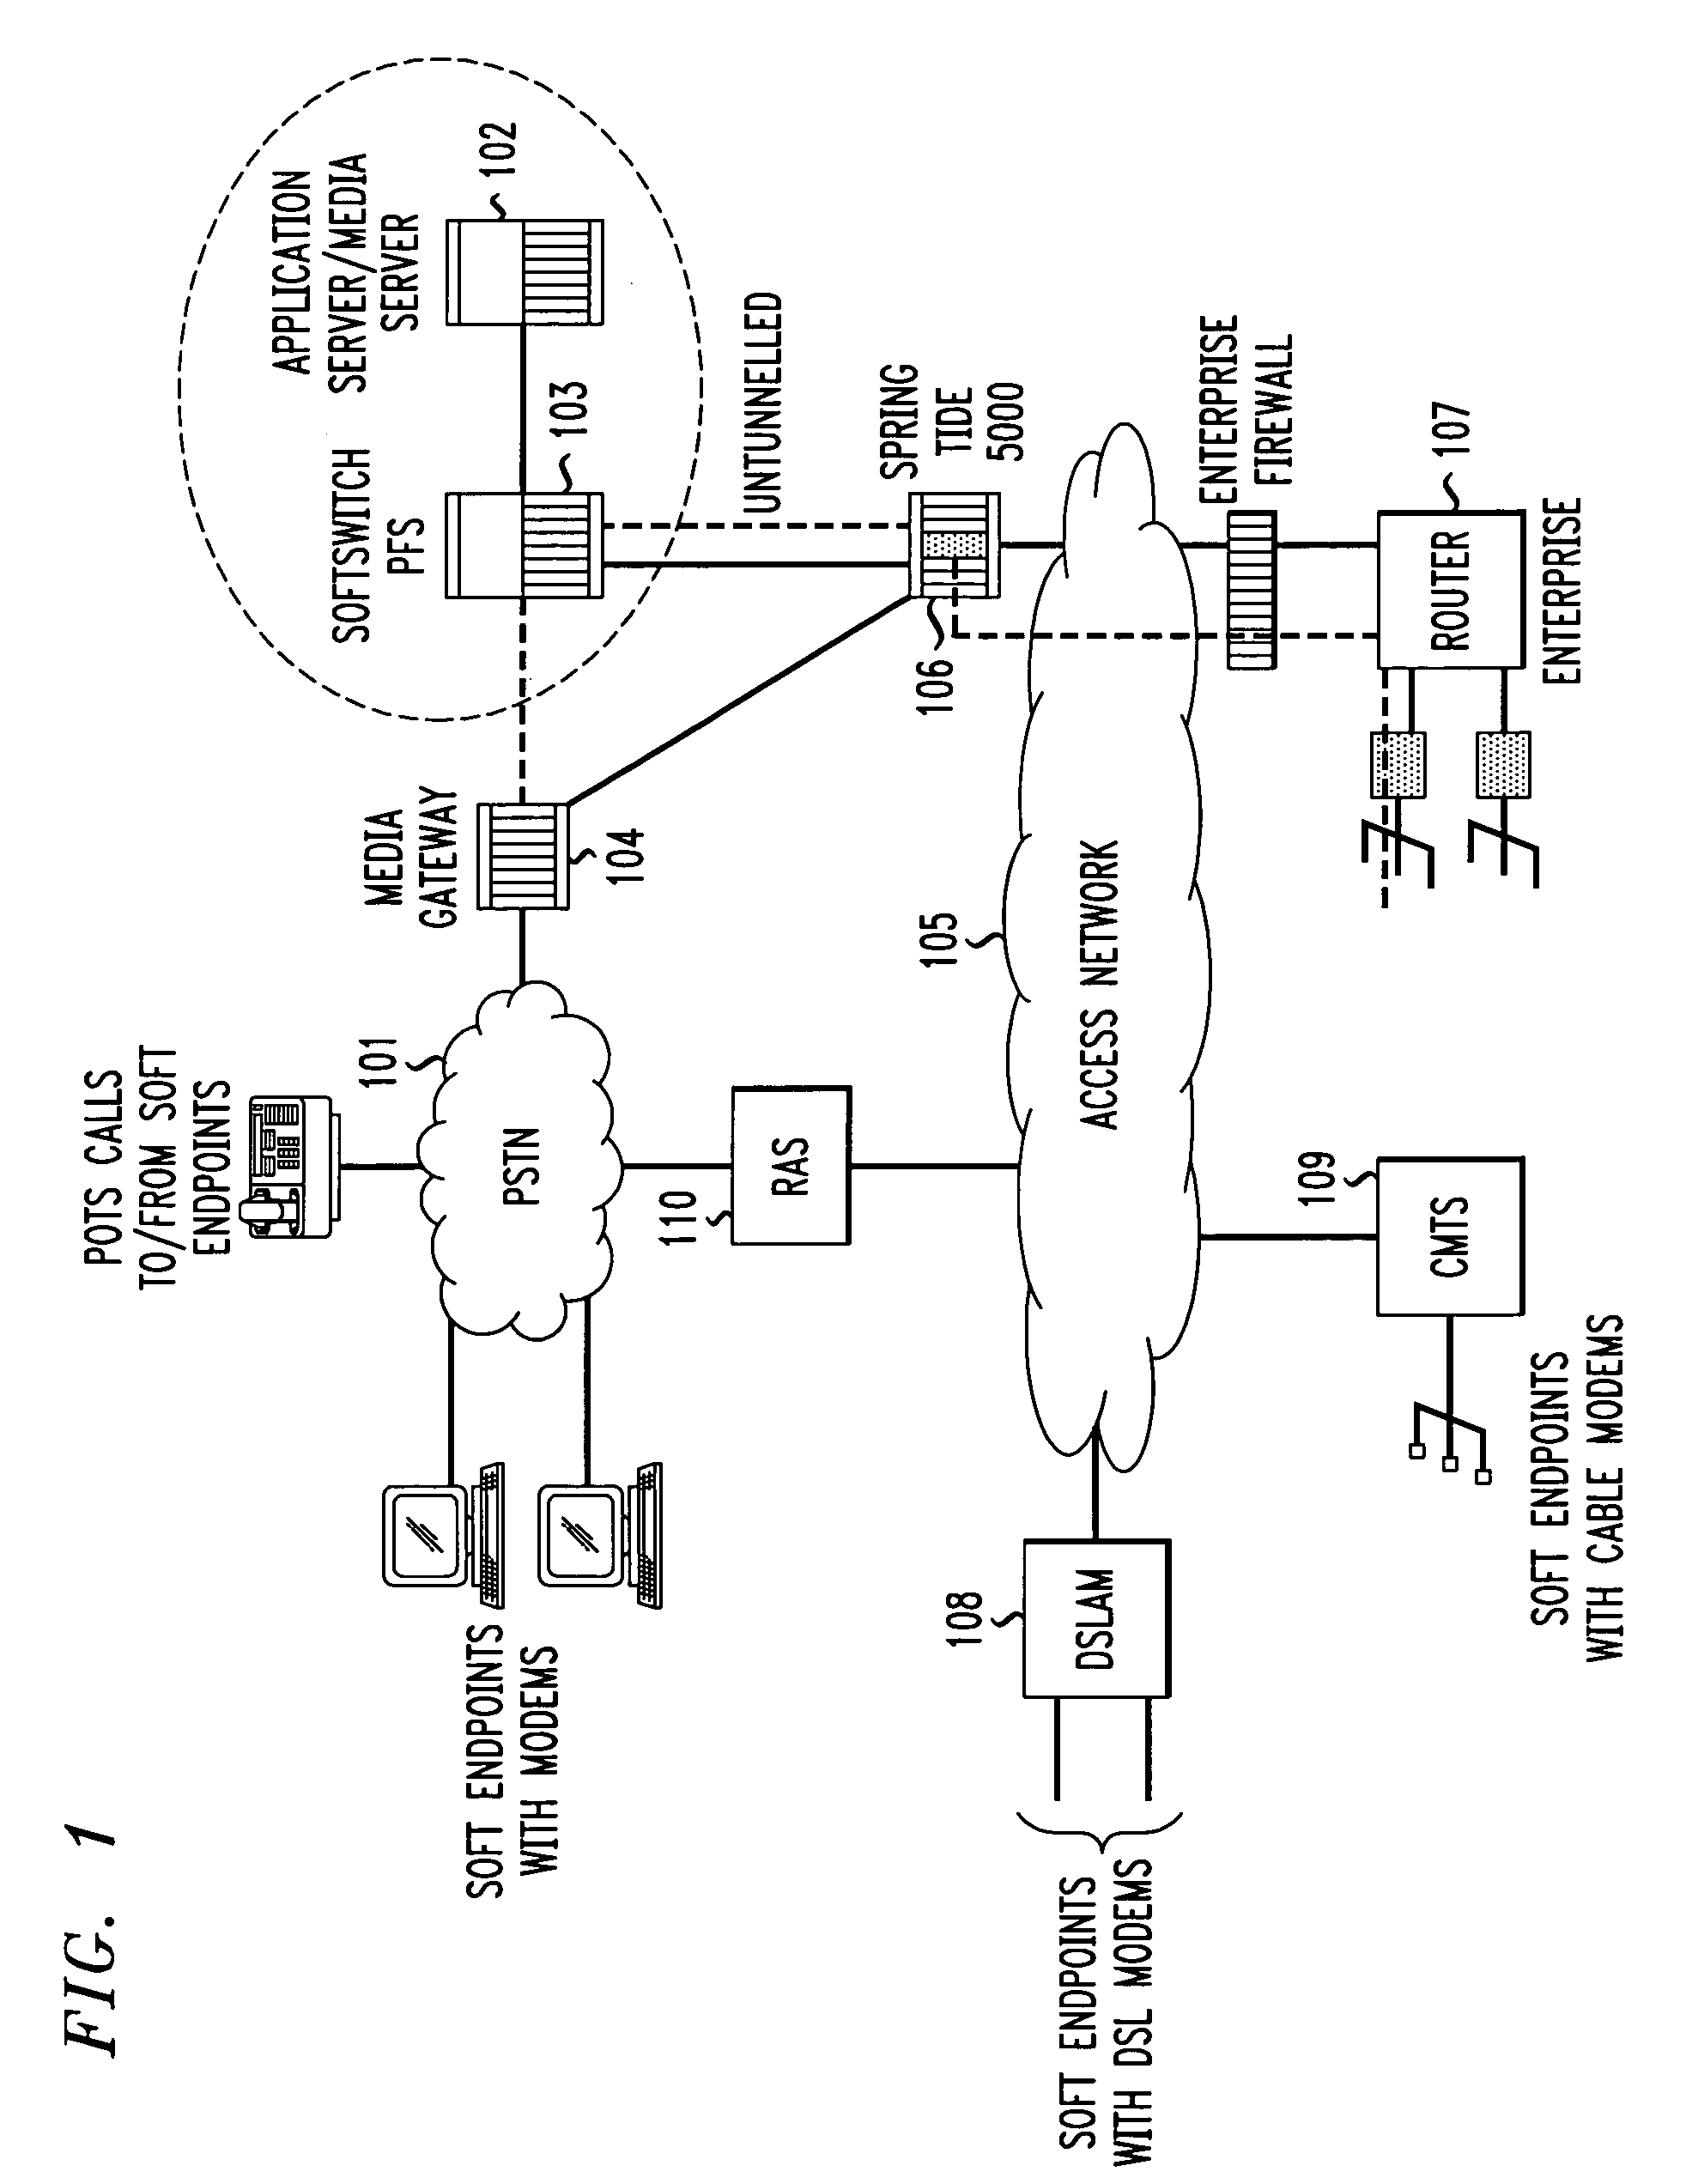 Apparatus and method for use in collaboration services